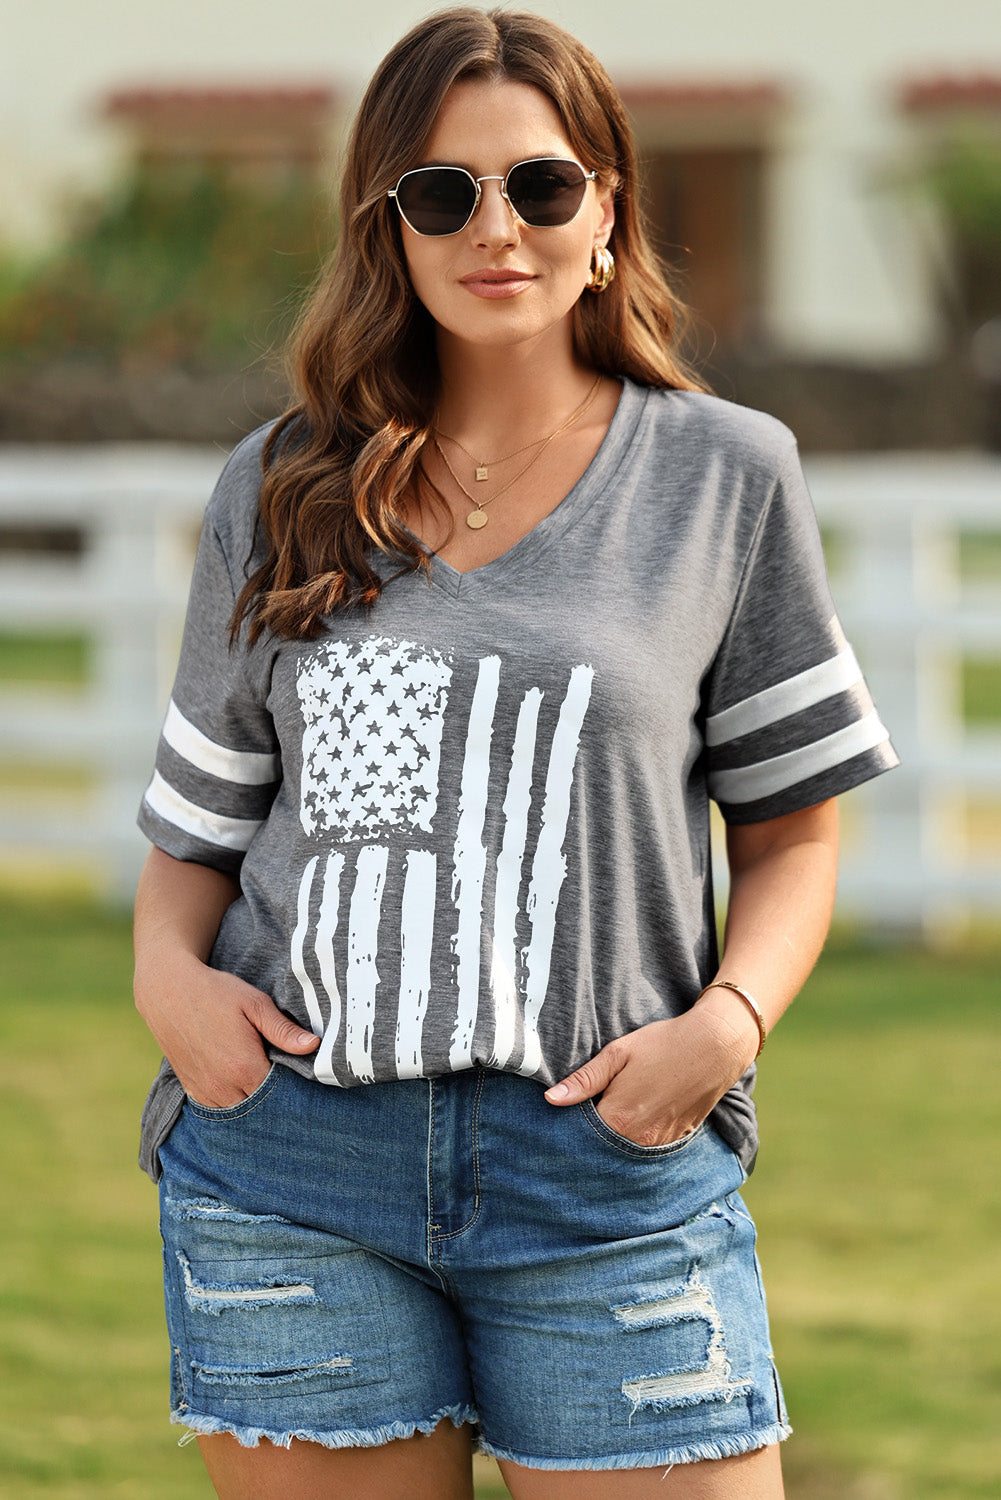 Plus Size US Flag Graphic V-Neck Tee The Stout Steer